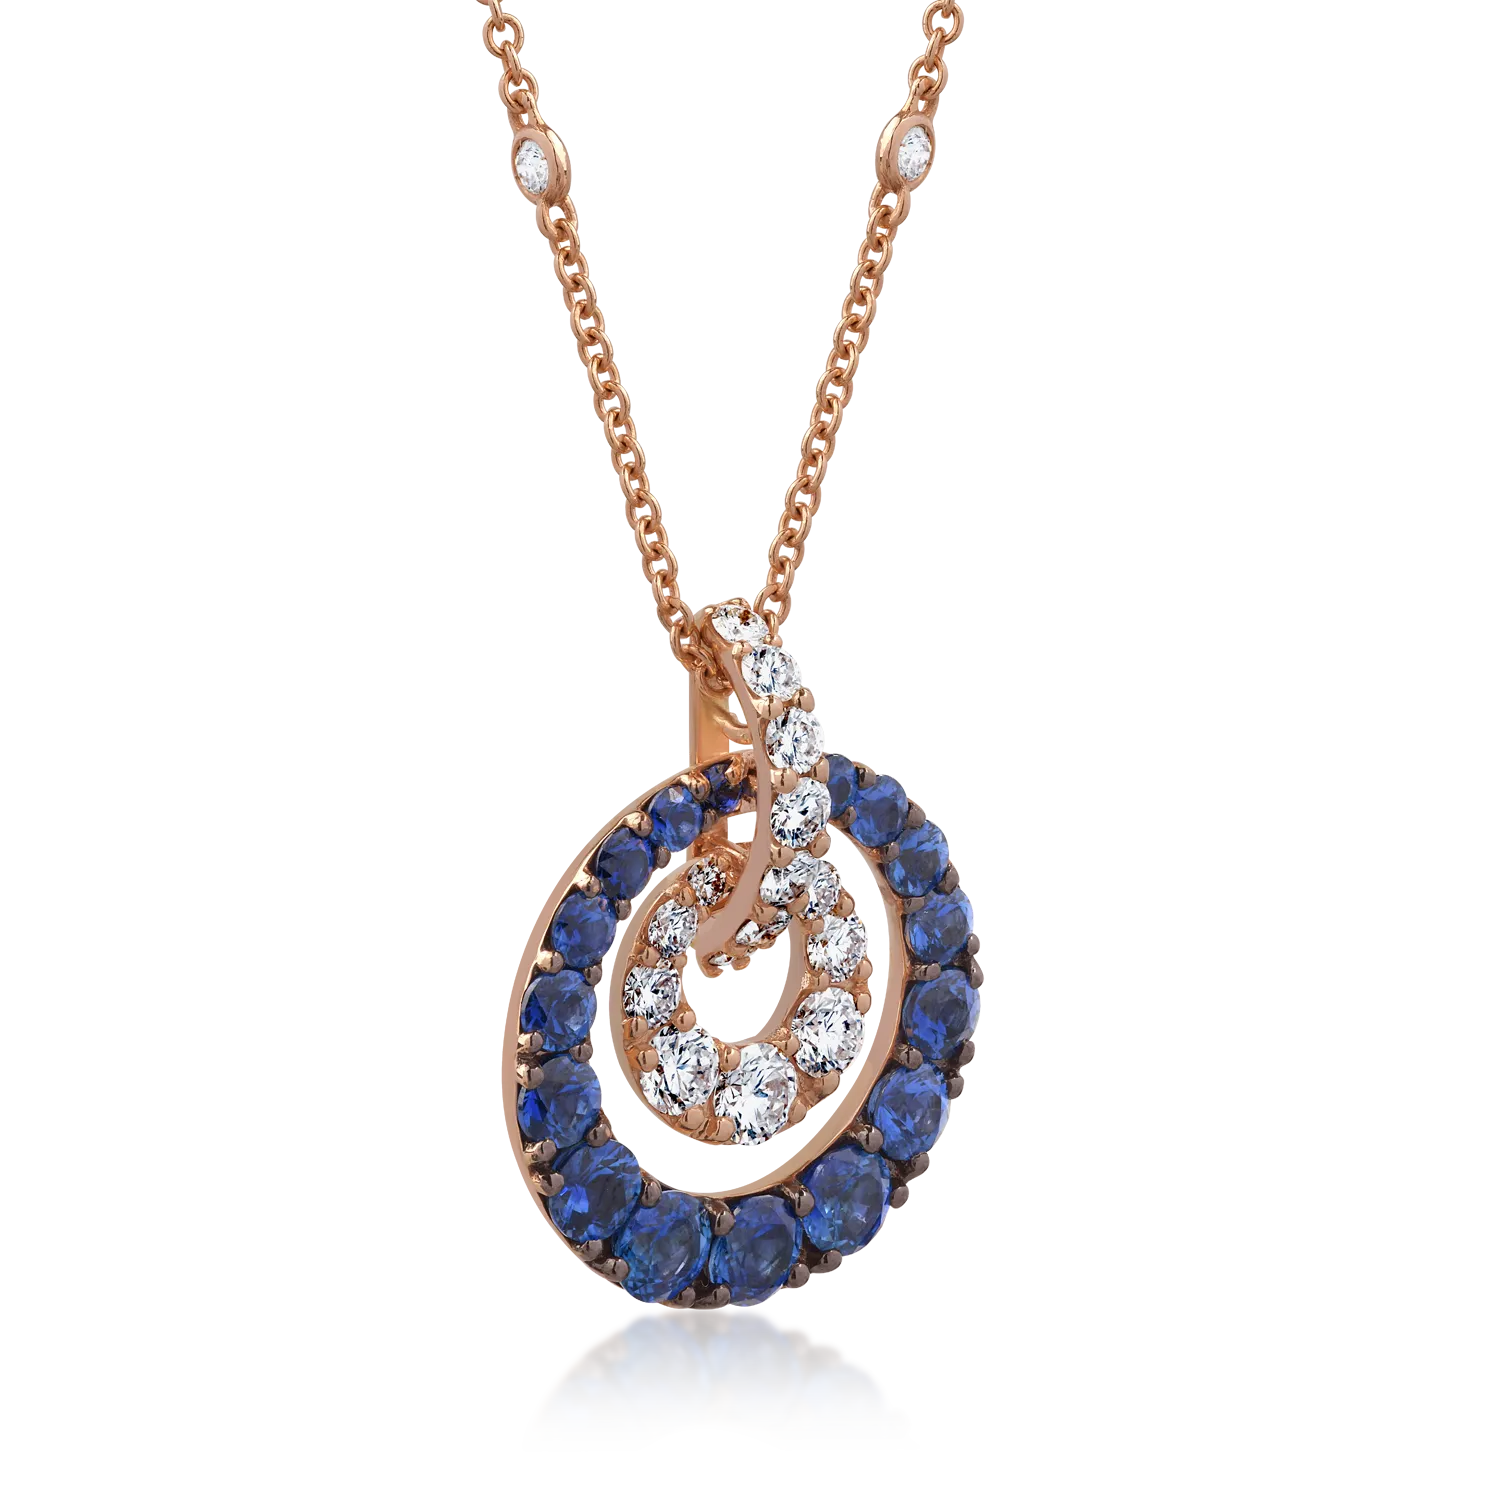 18K rose gold pendant necklace with 2.46ct sapphires and 1.17ct diamonds